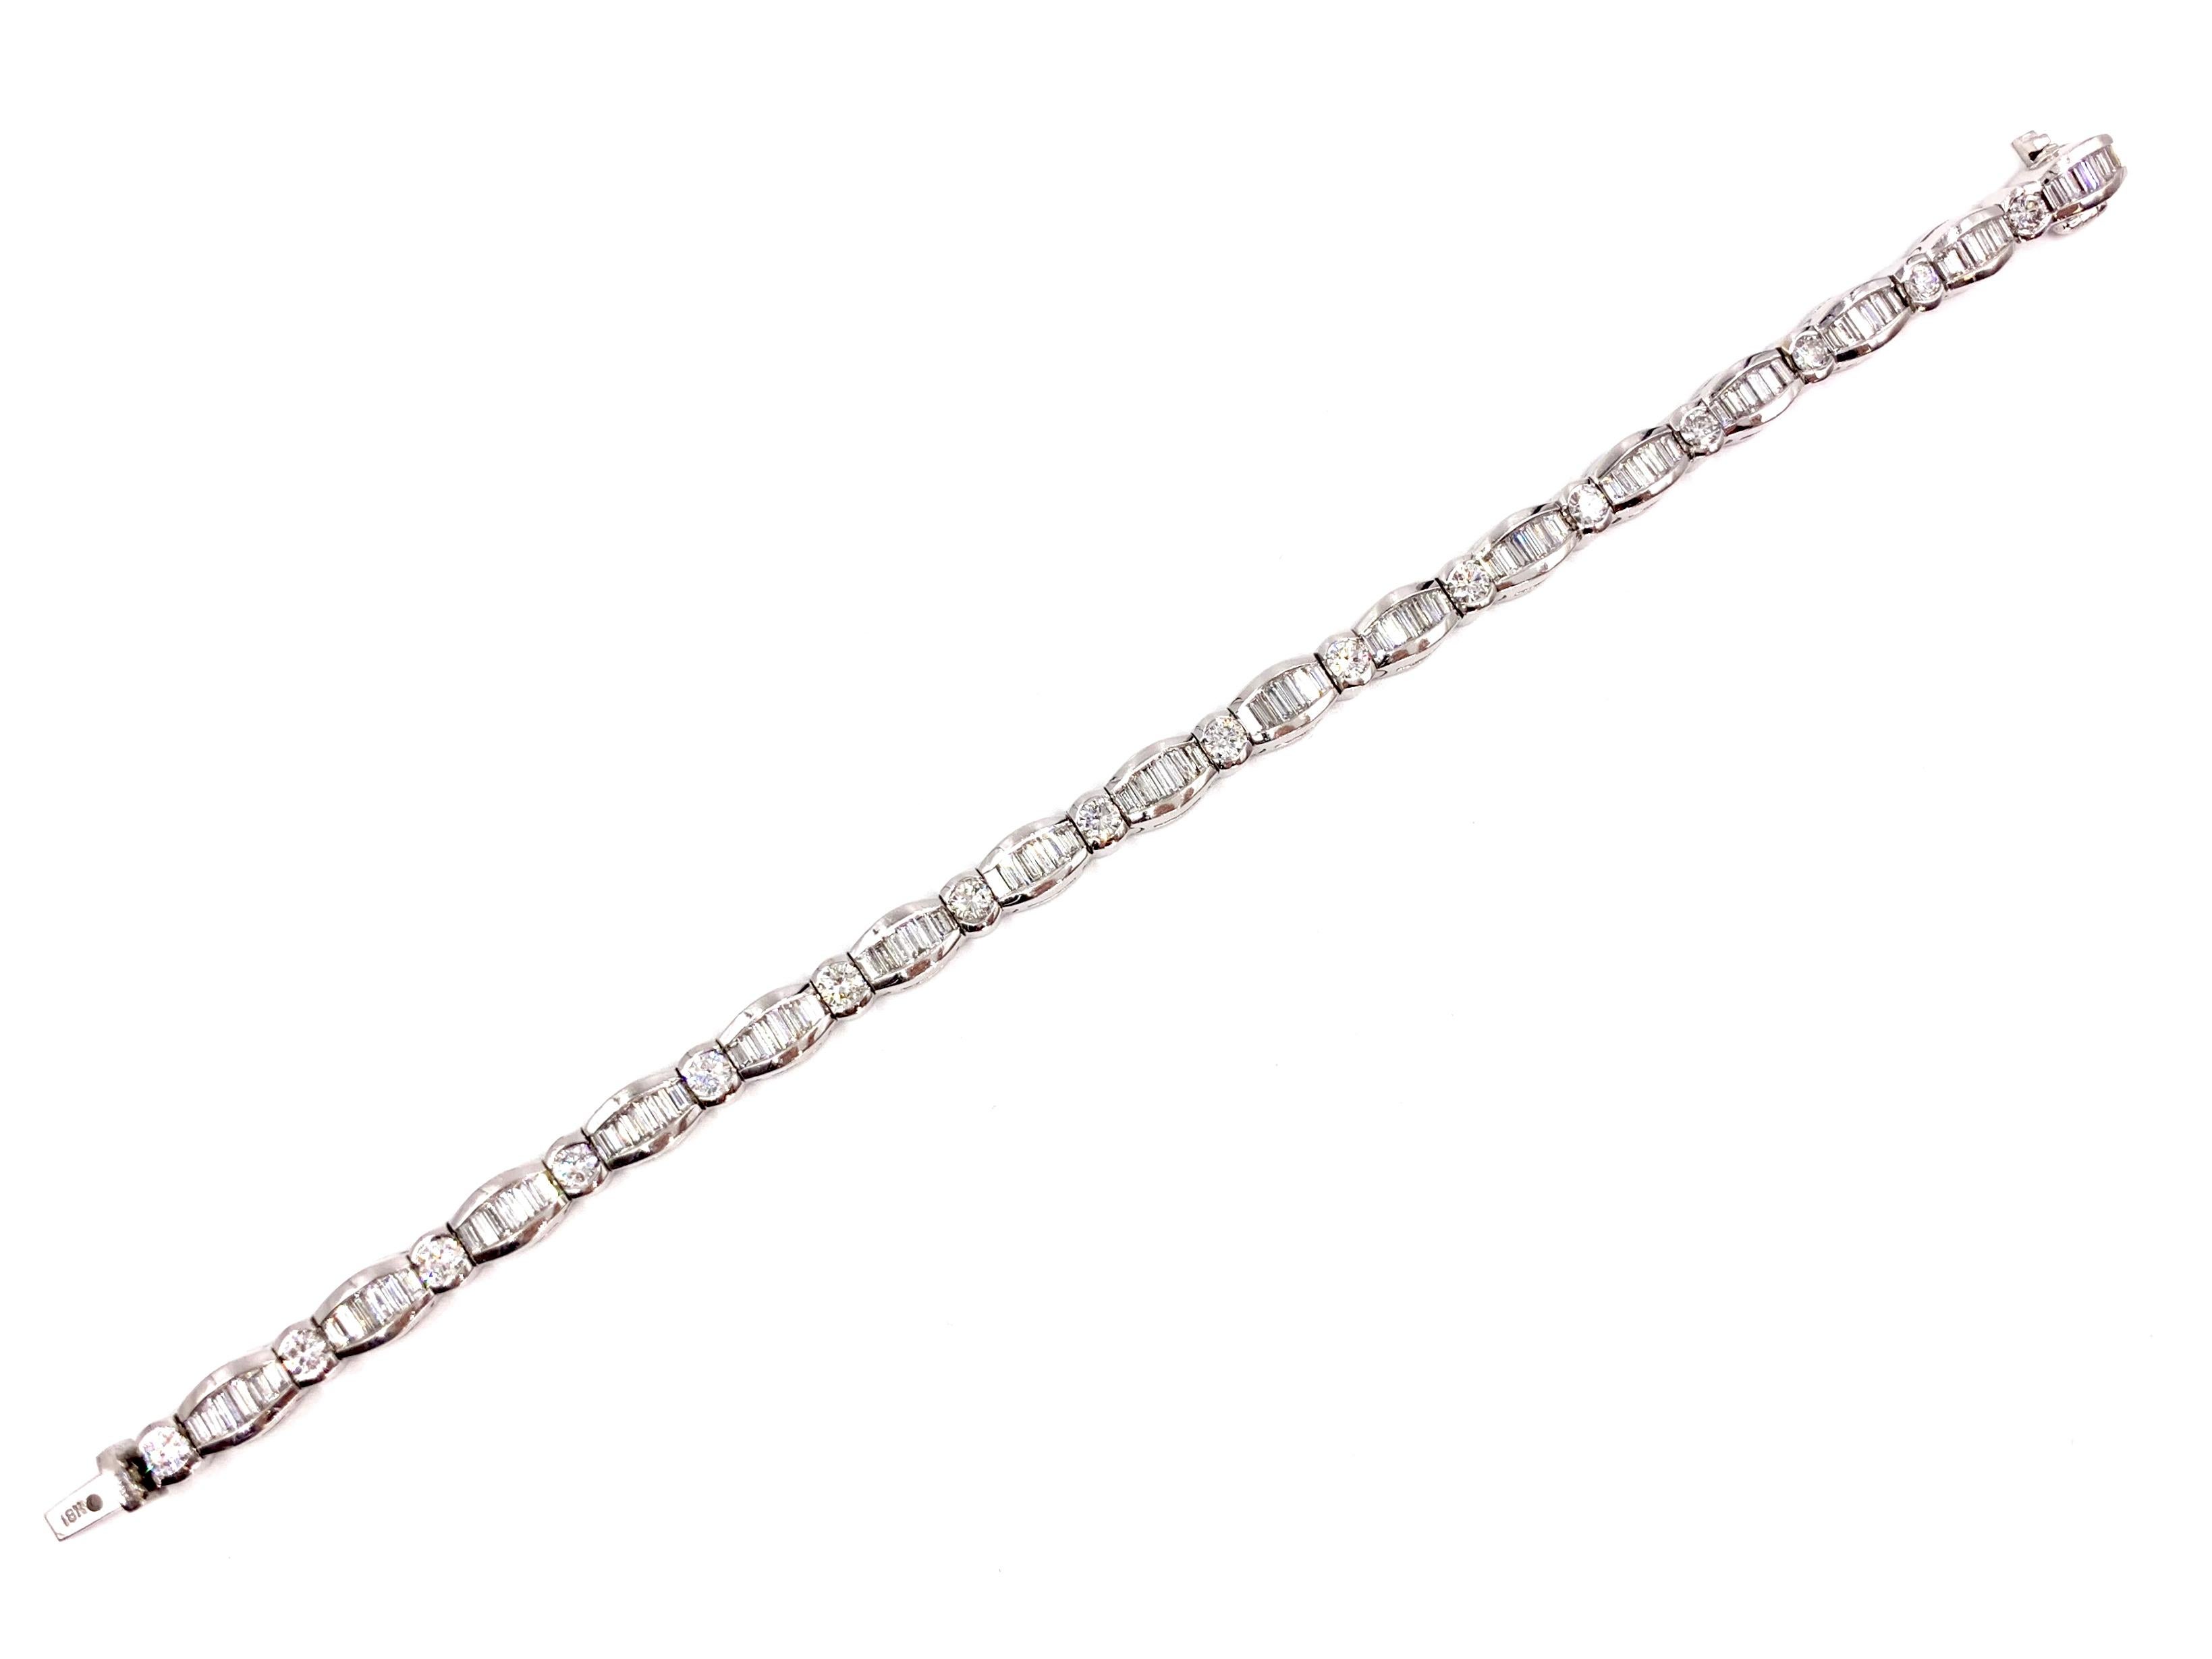 Gorgeous contemporary 18 karat white gold tennis bracelet featuring 16 round brilliant and 96 baguette diamonds at 5.25 carats total weight. Diamonds are of exceptional quality at approximately E-F color, VS2 clarity and are beautifully channel set